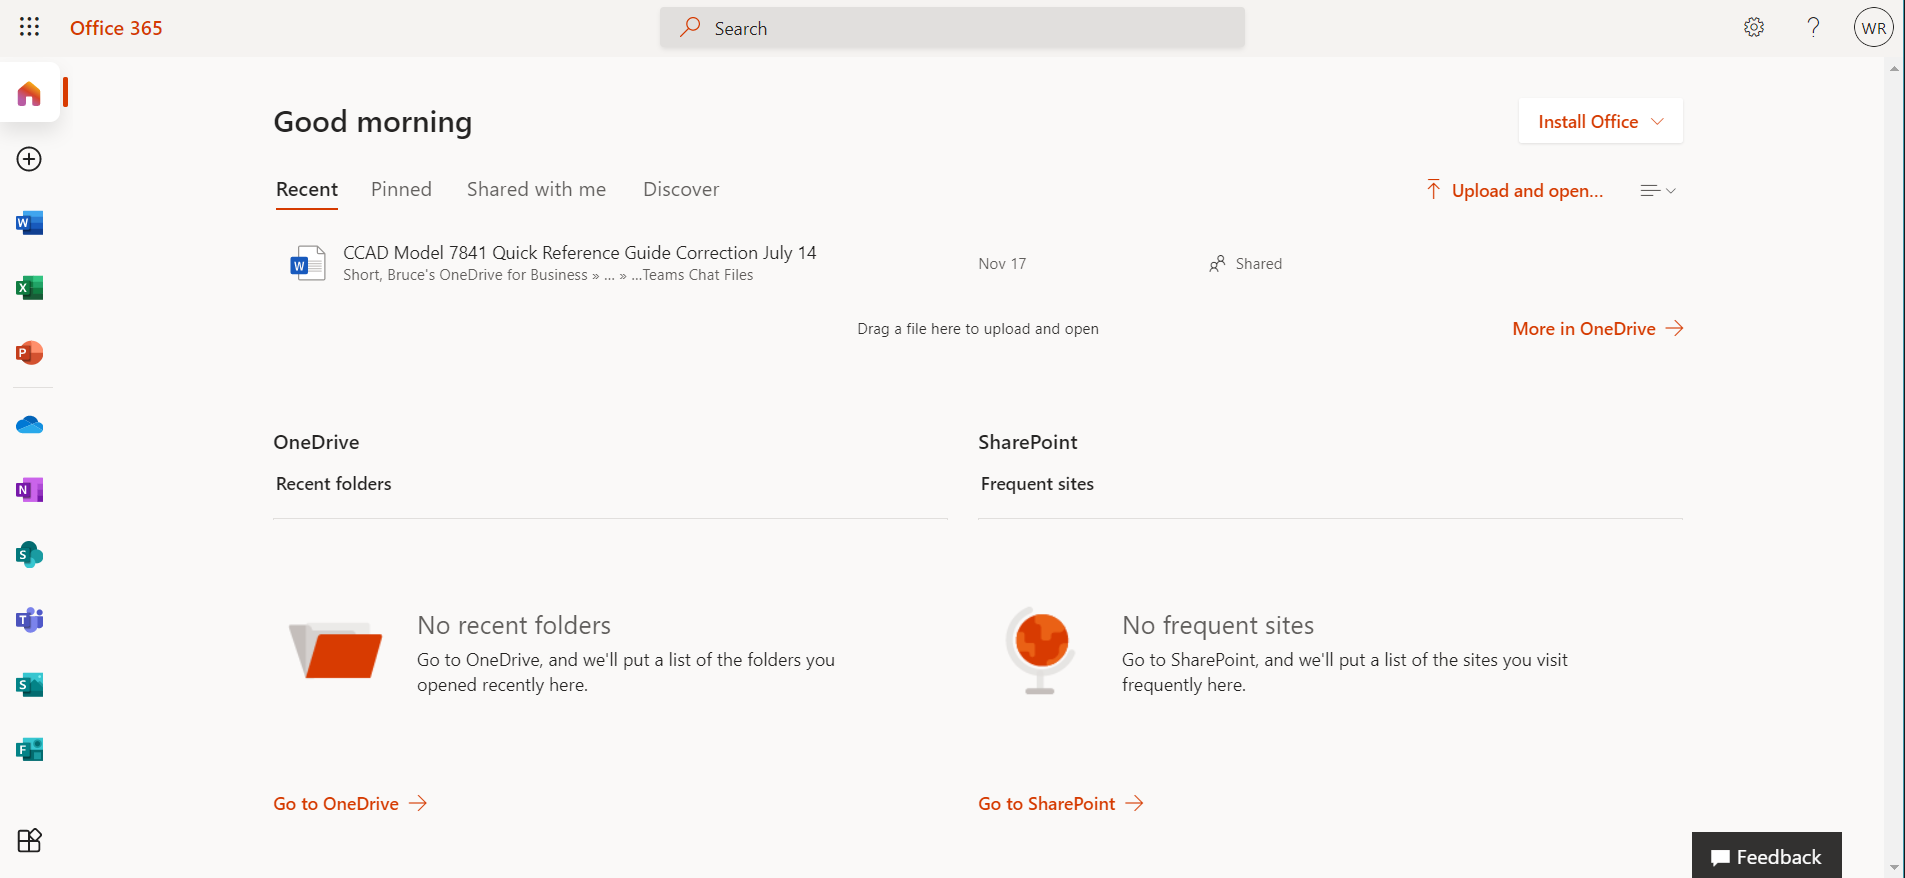 The Office 365 homepage